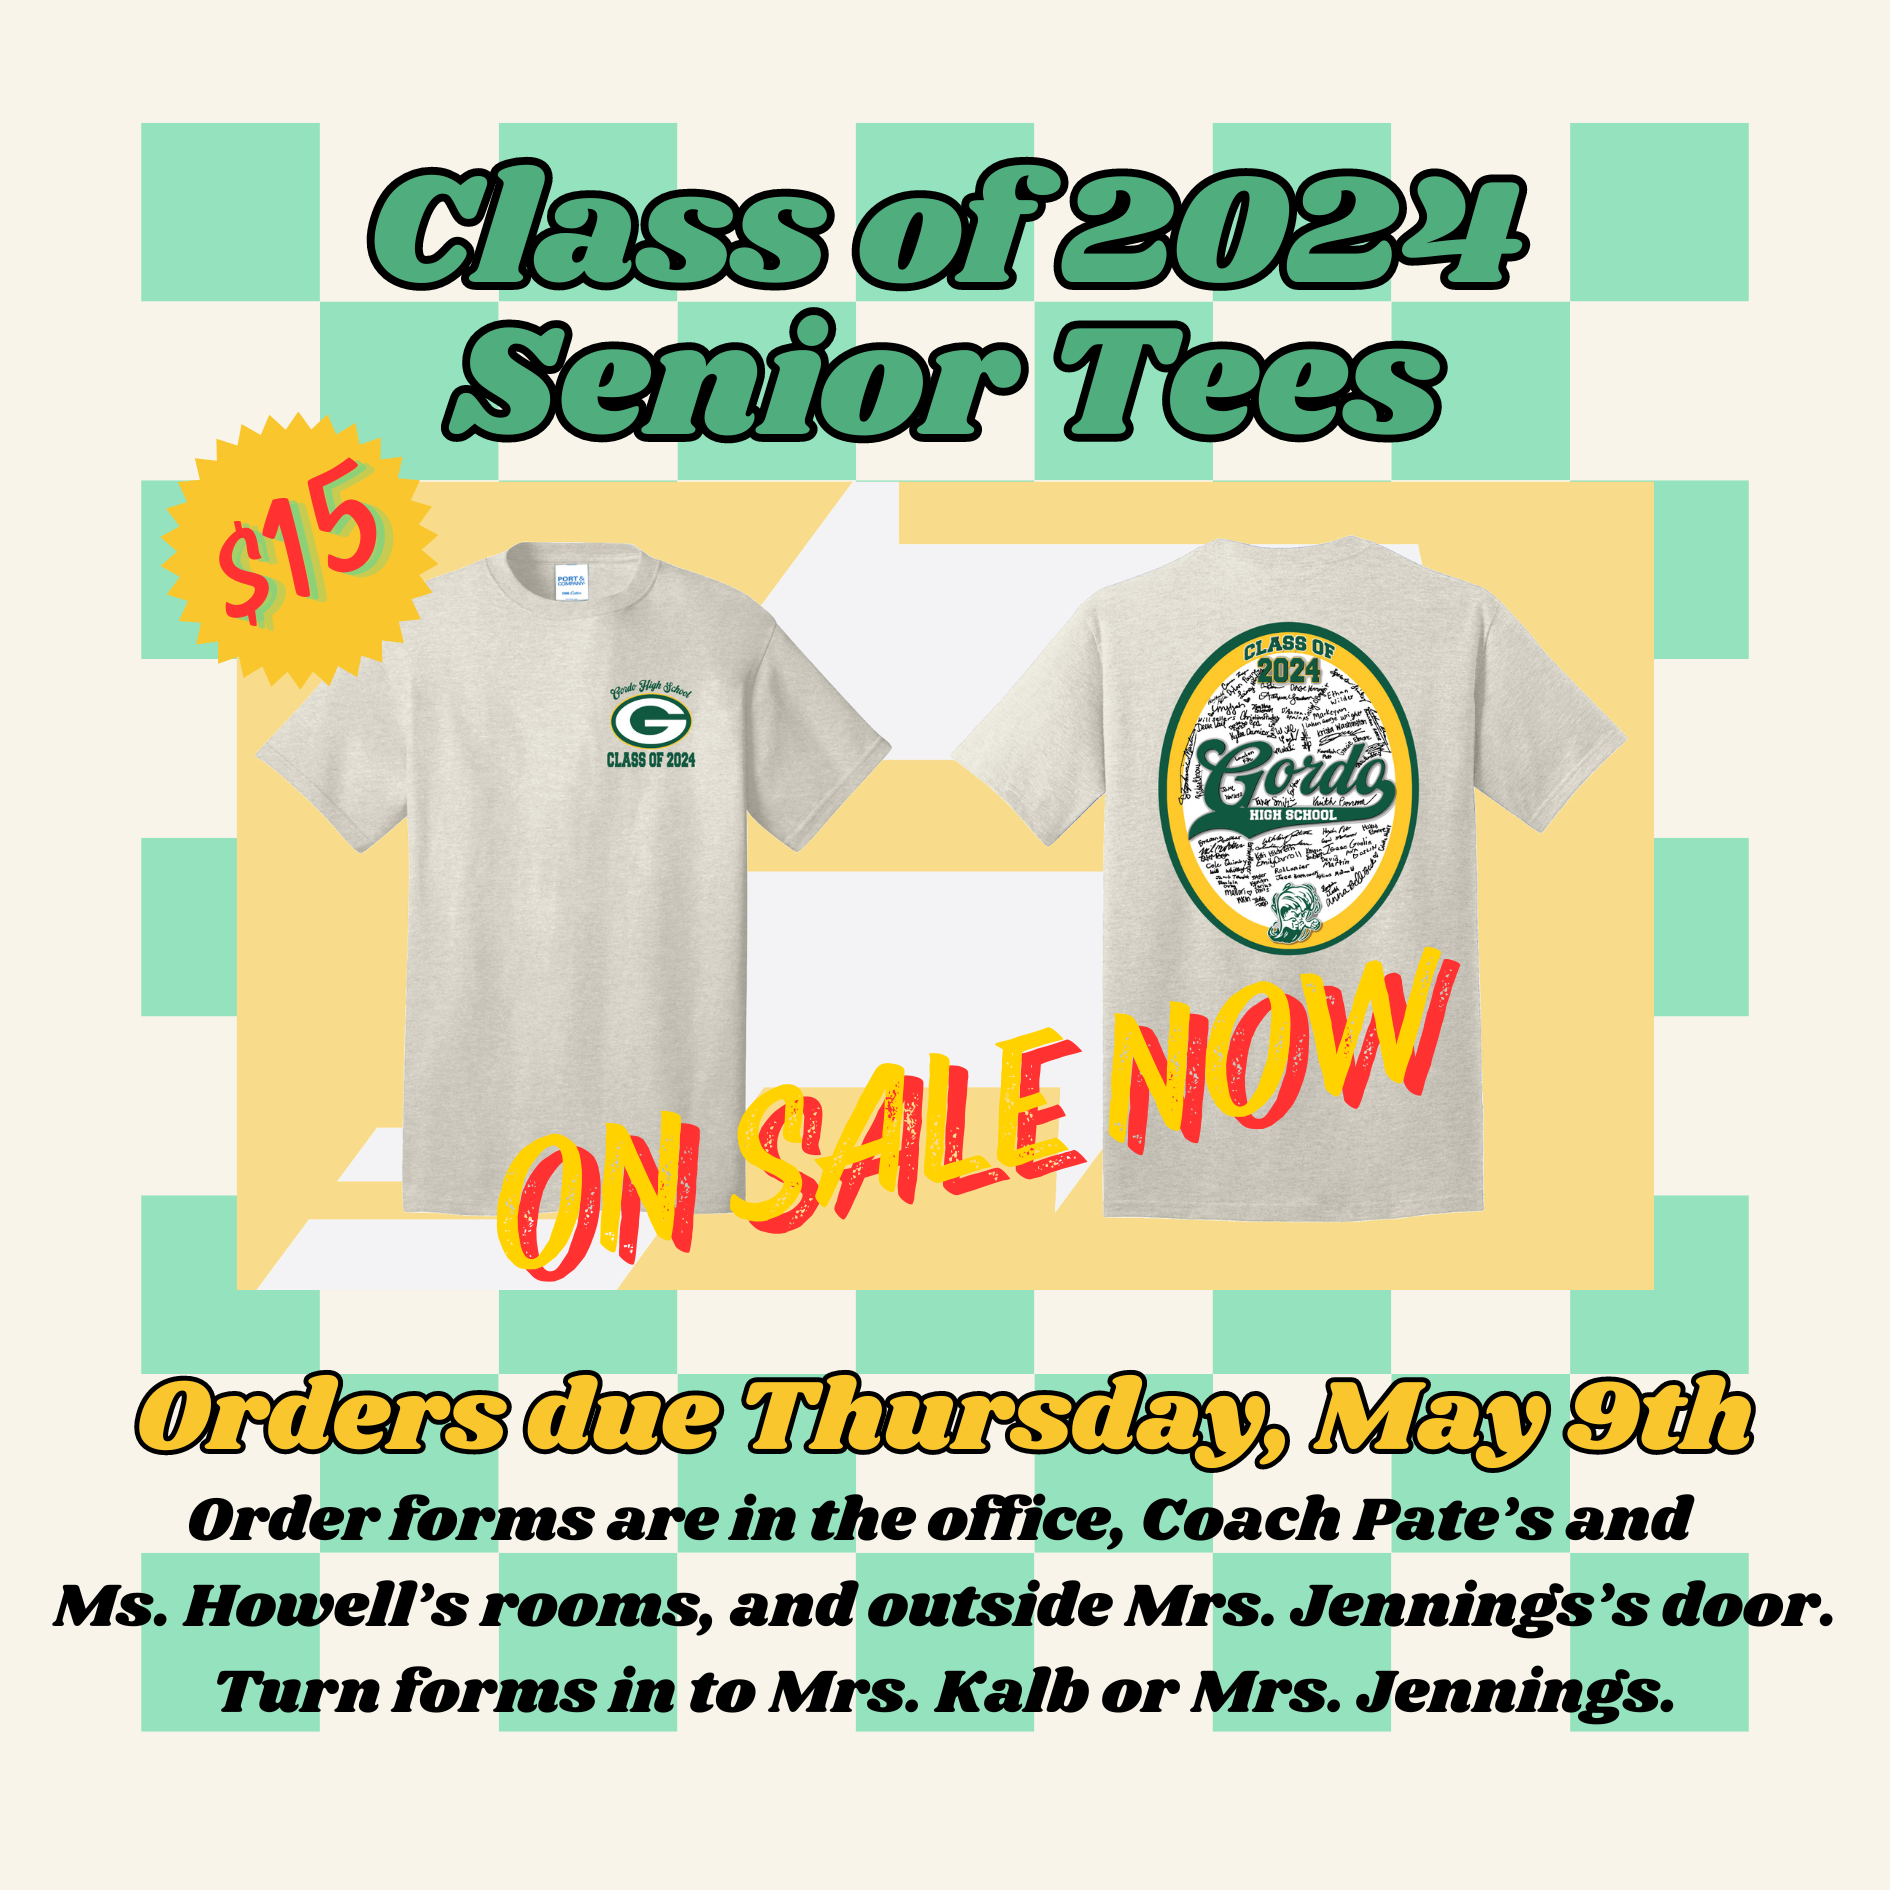 Class of 2024 tees on sale now. Orders due 5/9. $15. See Mrs. Jennings or Mrs. Kalb.